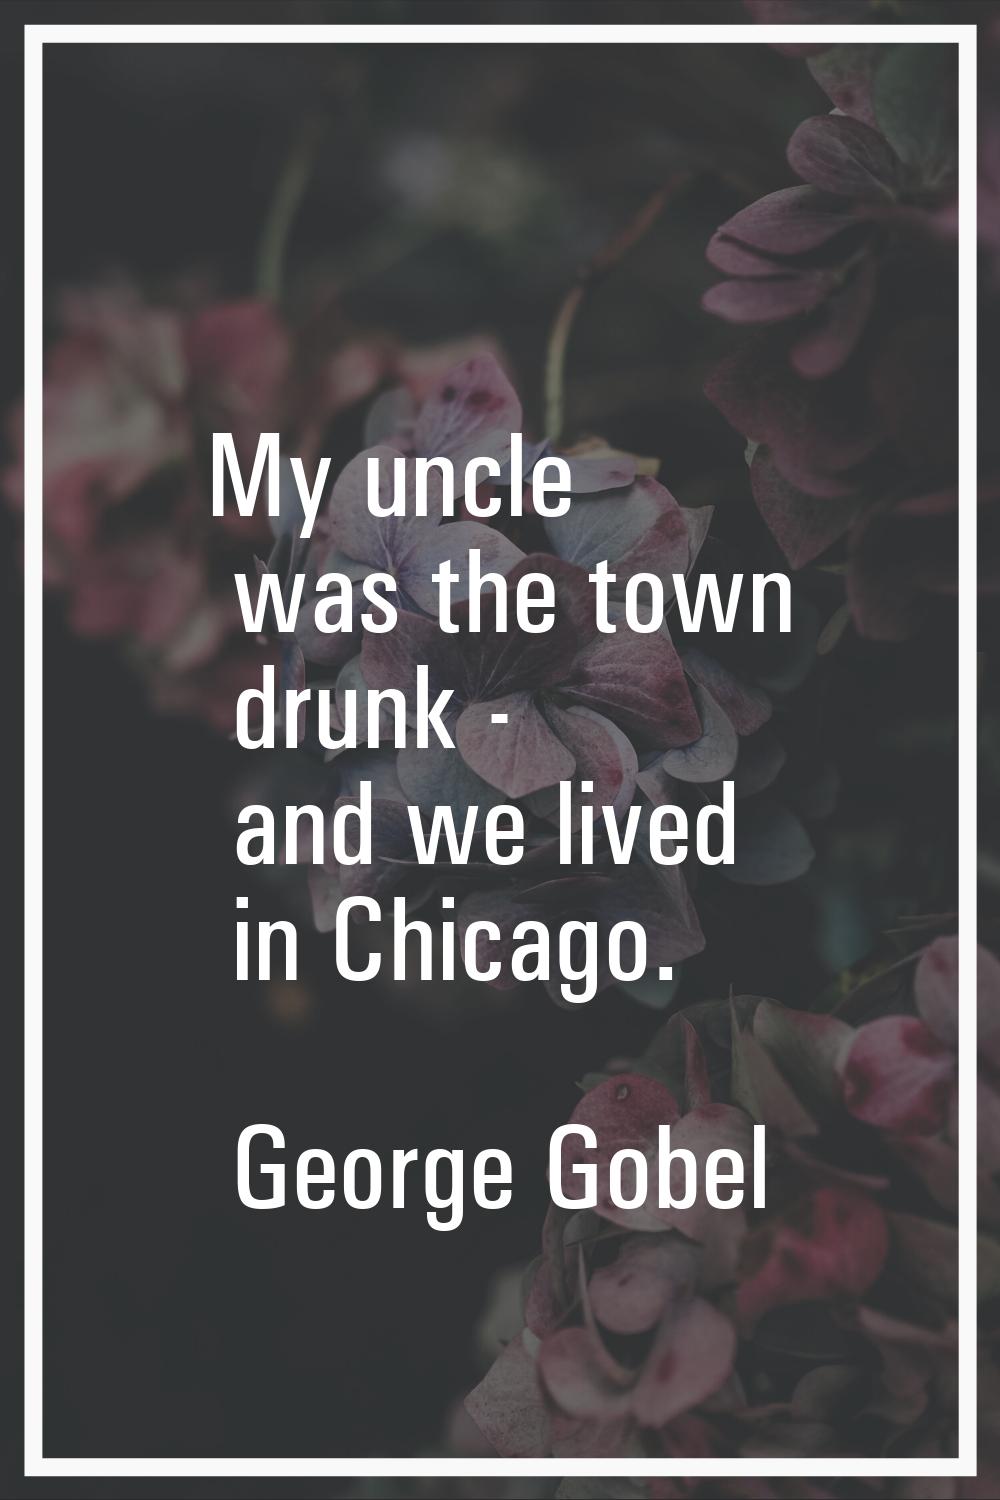 My uncle was the town drunk - and we lived in Chicago.